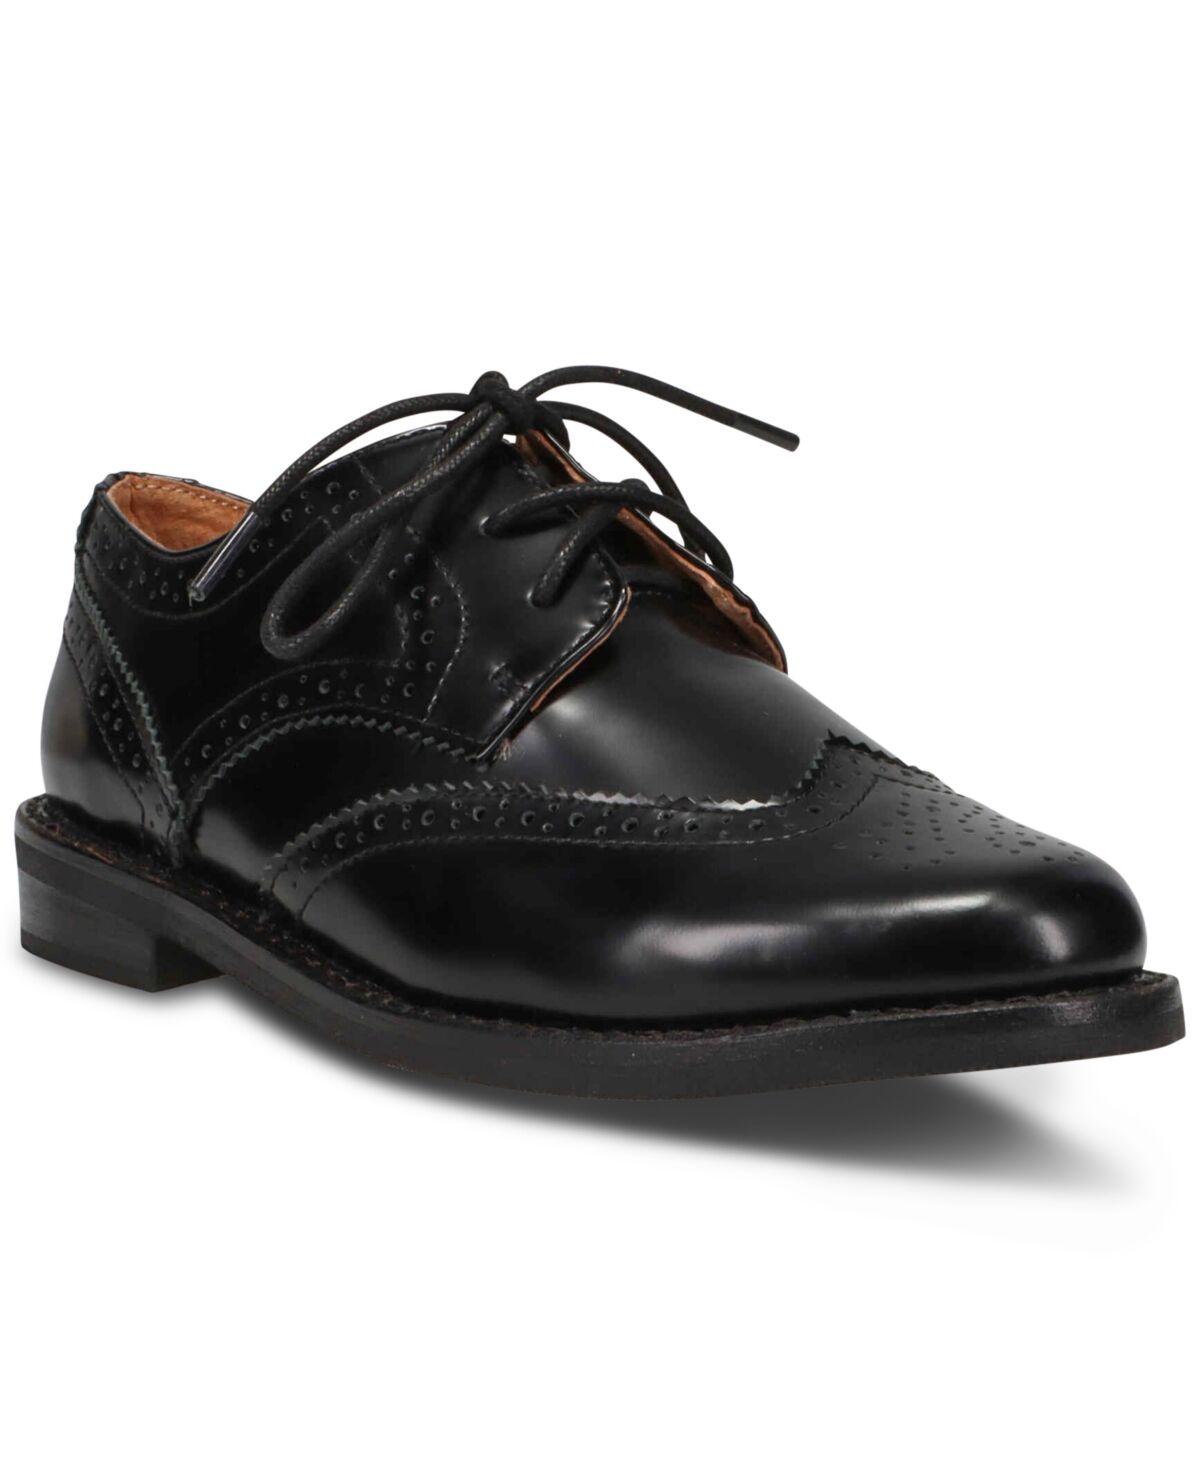 Ralph Lauren Polo Ralph Lauren Little Boys Leather Wing Tip Oxford Dress Shoes from Finish Line - Black